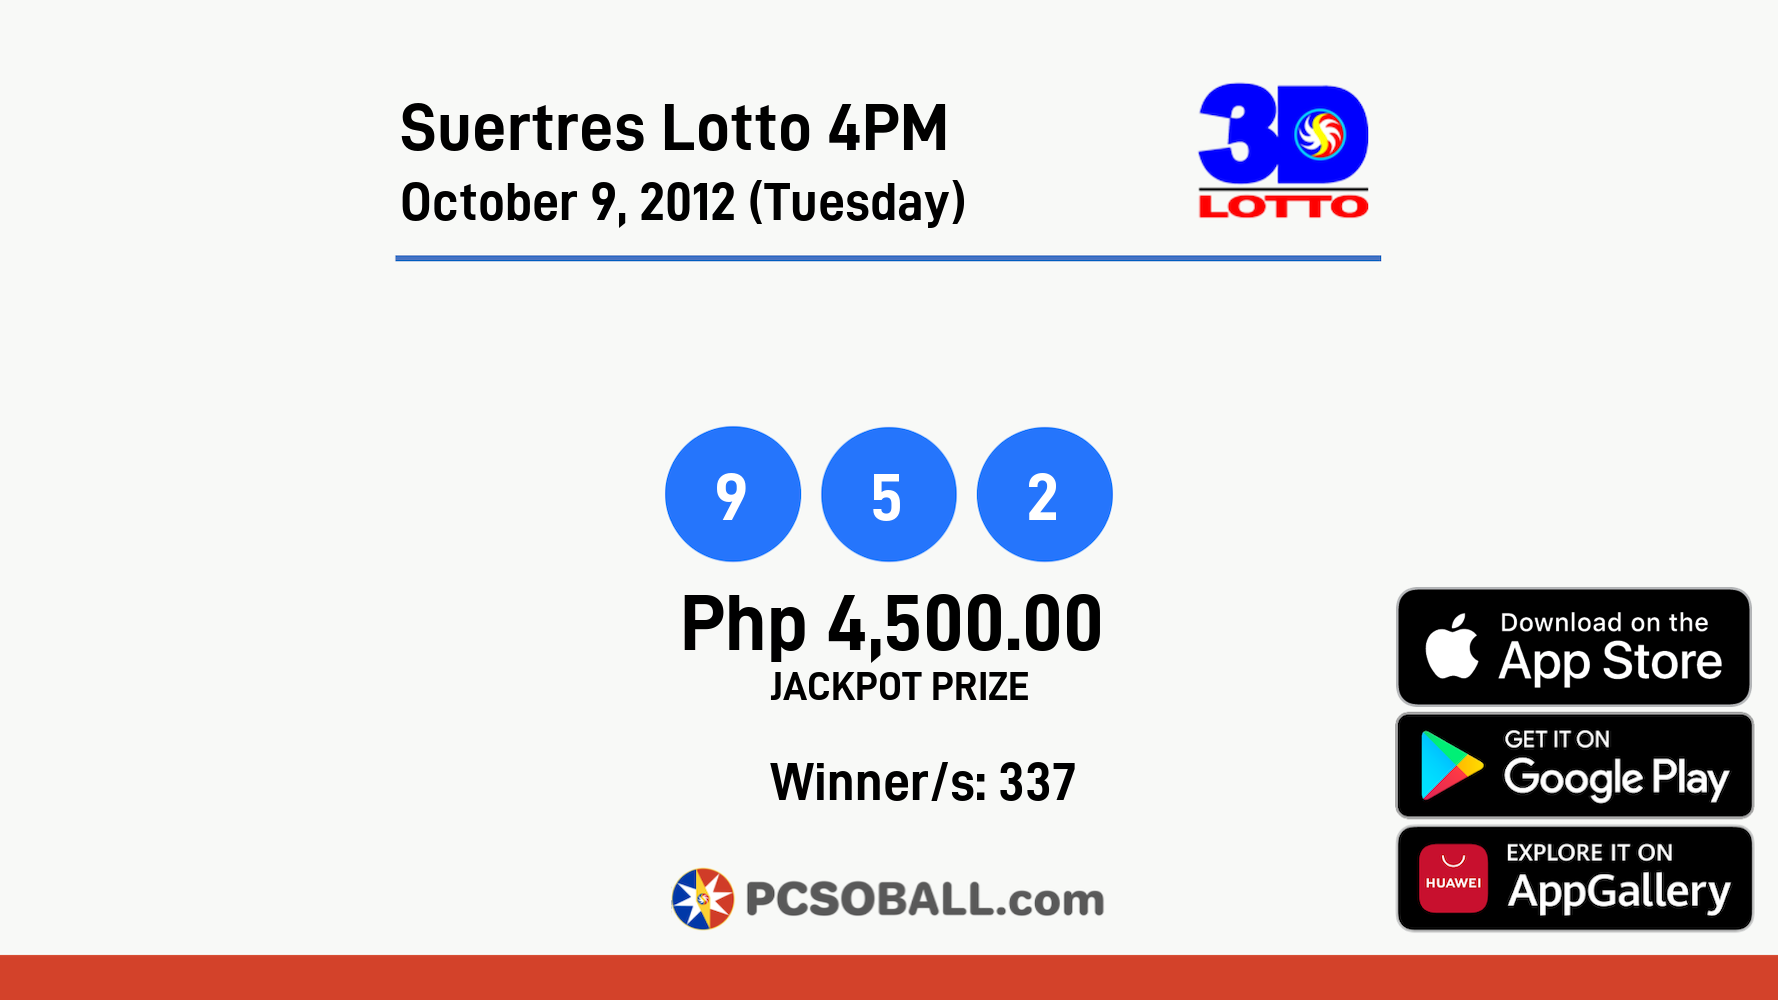 Suertres Lotto 4PM October 9, 2012 (Tuesday) Result